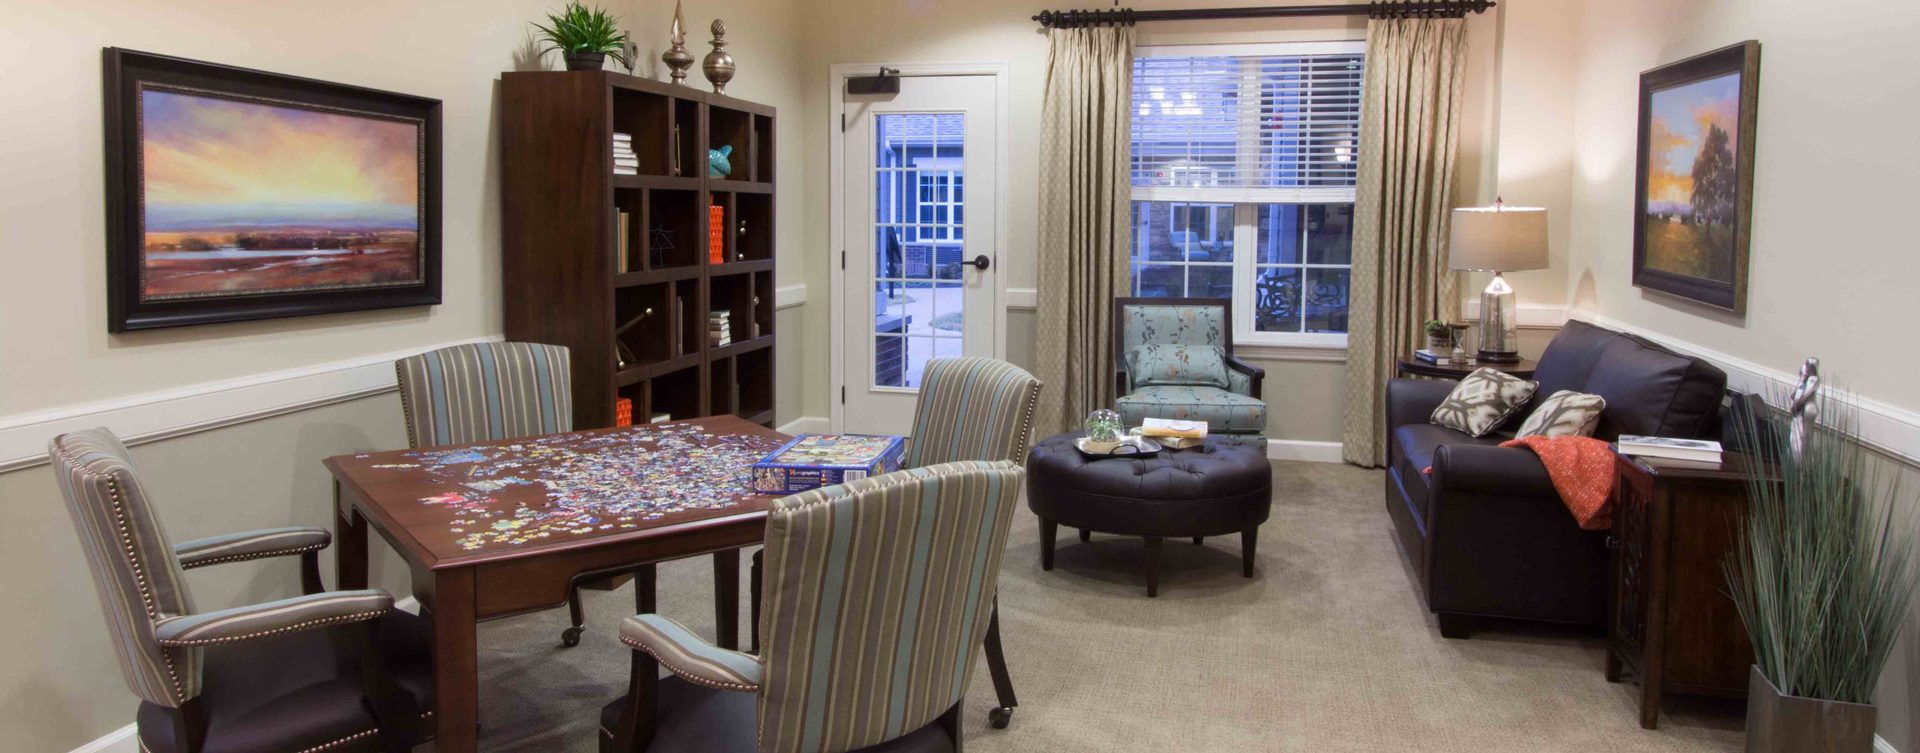 Enjoy a good book in the sitting area at Bickford of Gurnee